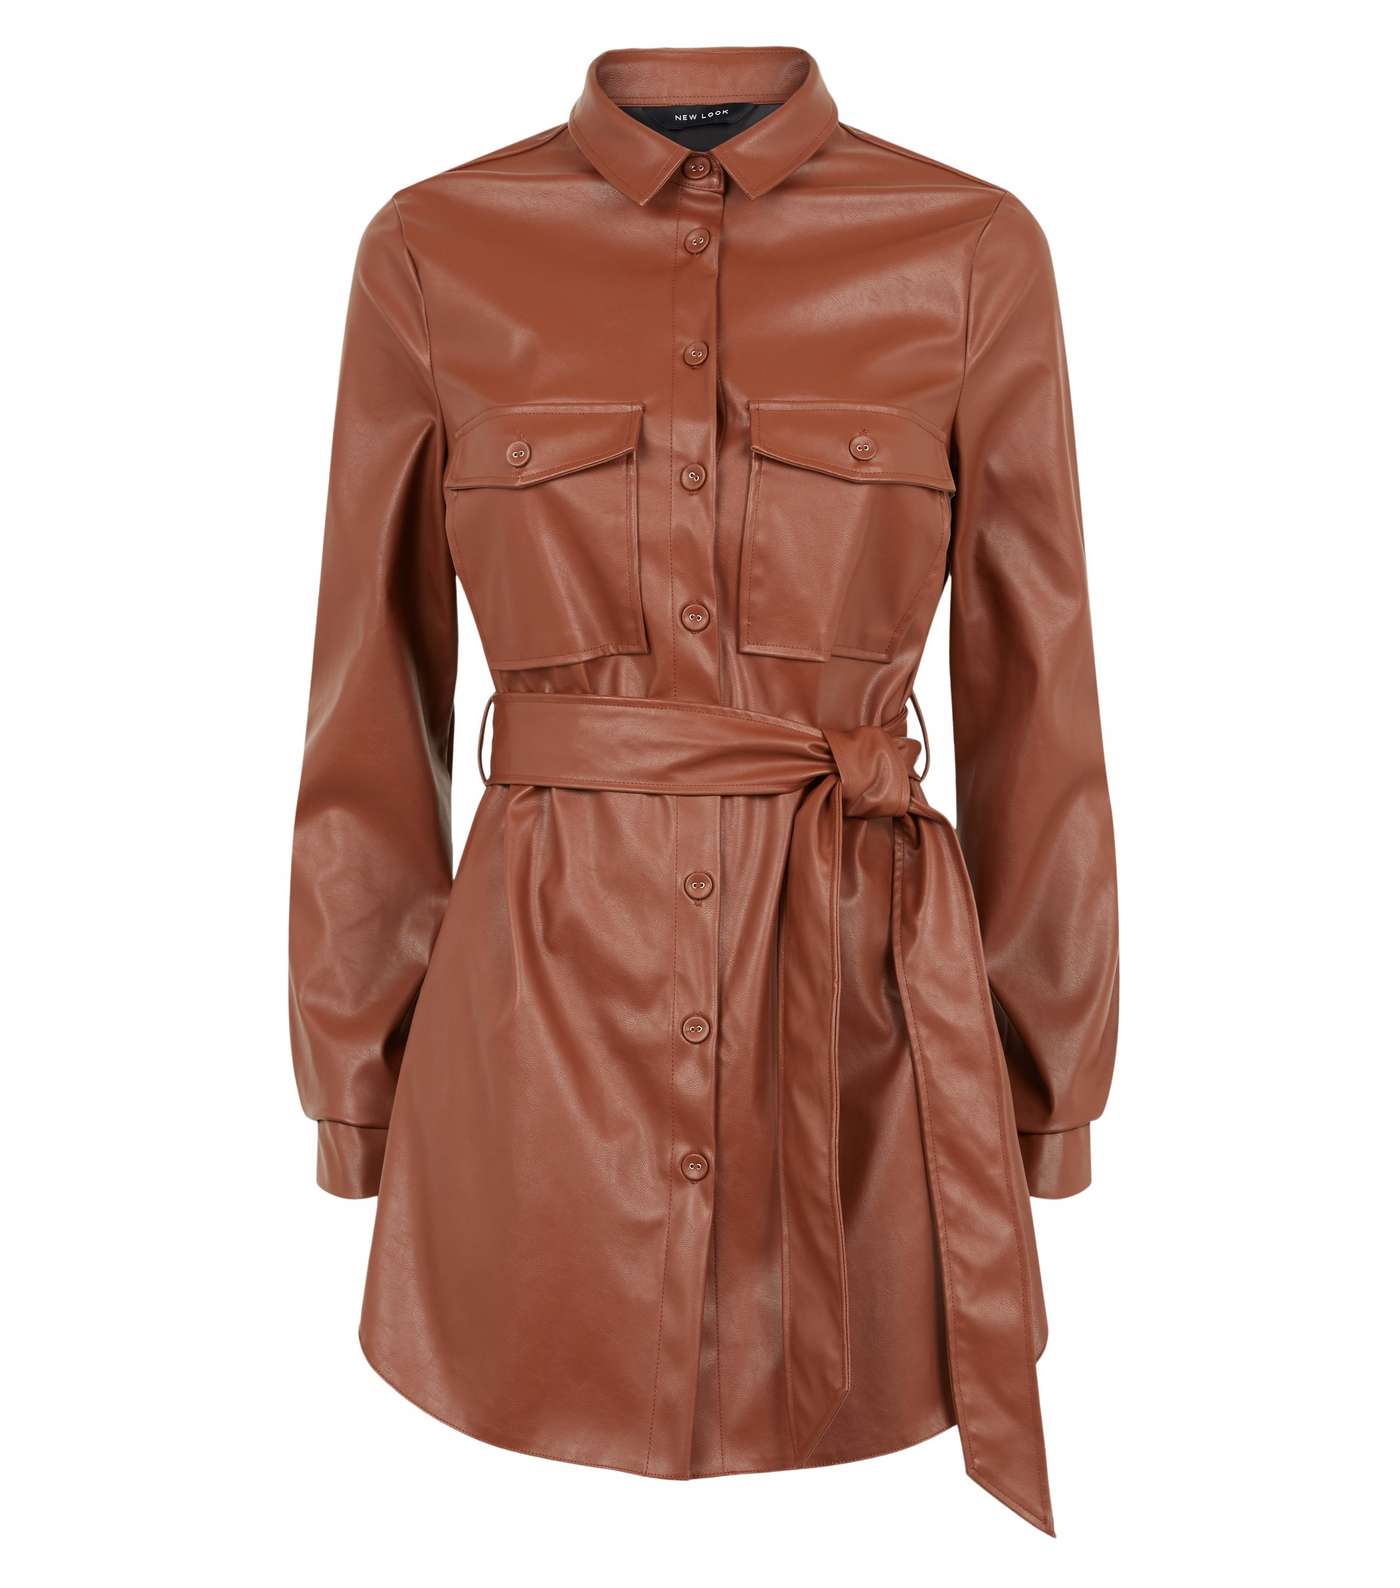 Tan Leather-Look Belted Shirt Image 4